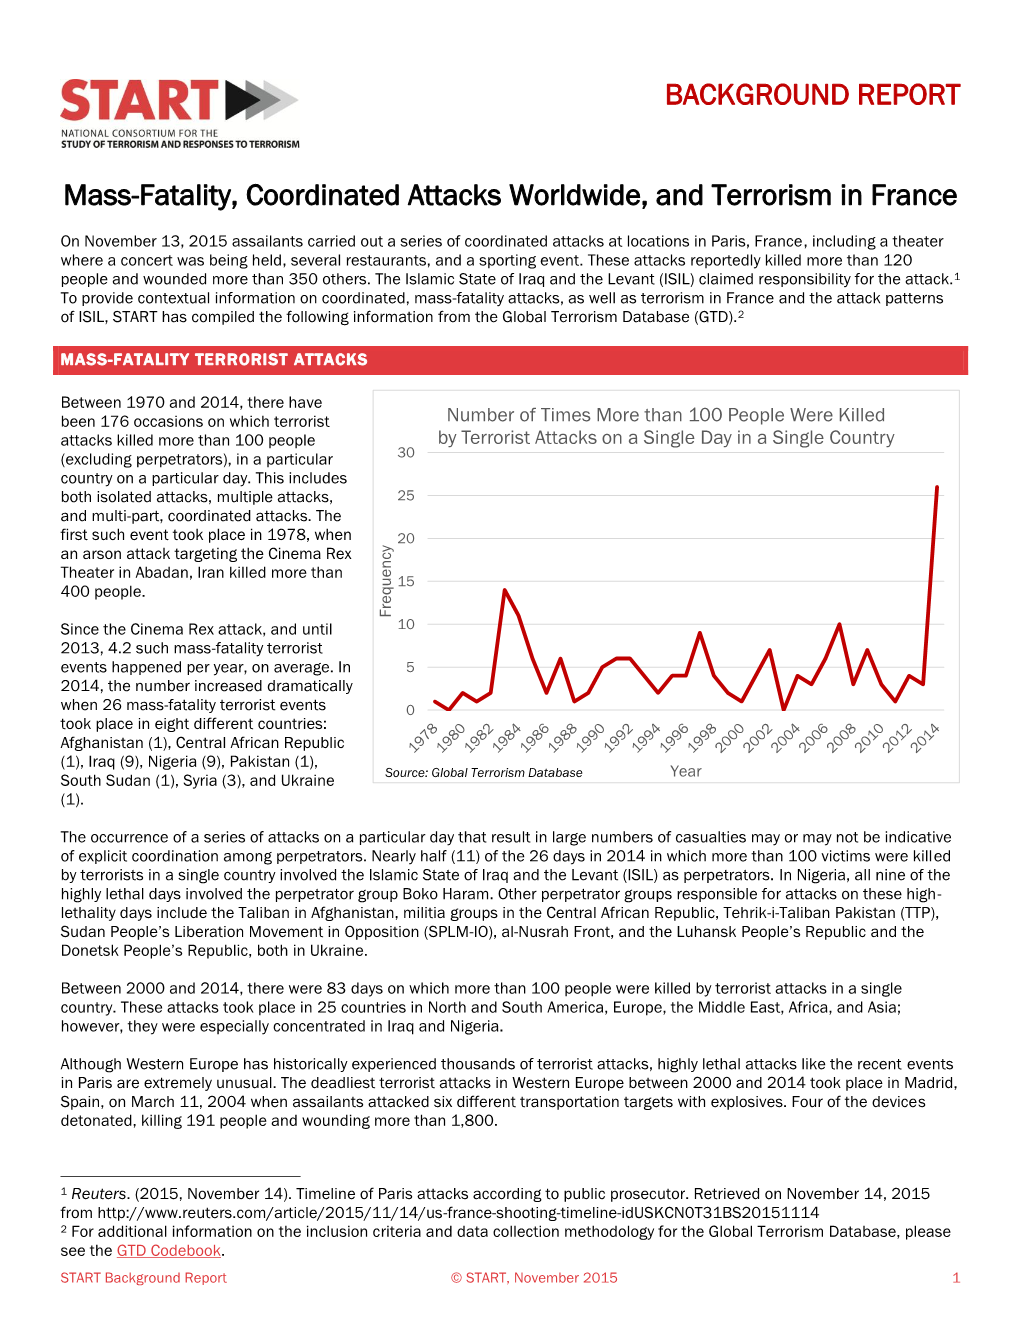 Mass-Fatality, Coordinated Attacks Worldwide, and Terrorism in France